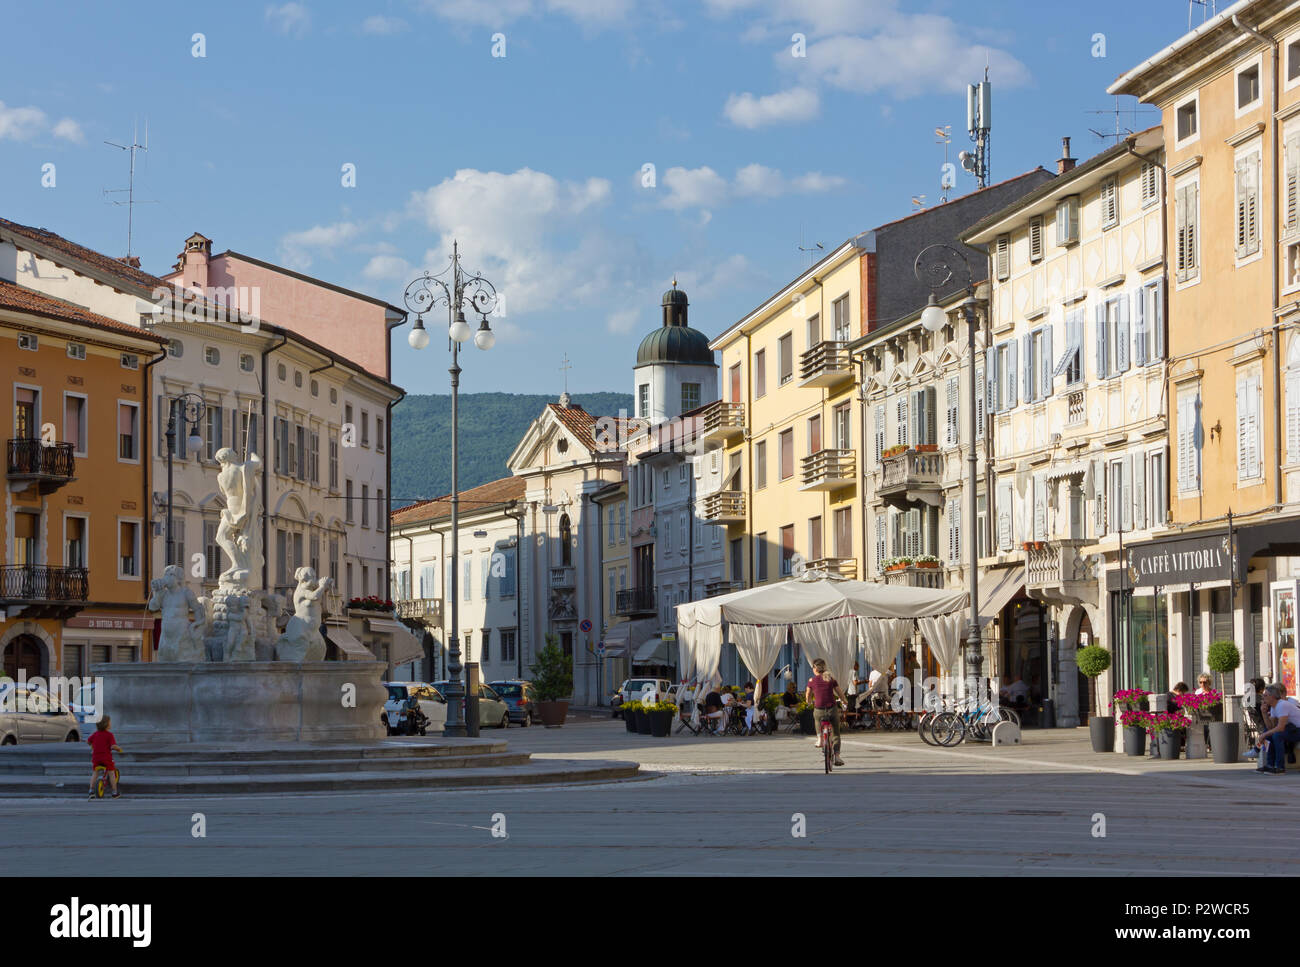 GORIZIA, Italy - May 20, 2018: Life in Piazza Vittoria, one of the city's main squares Stock Photo